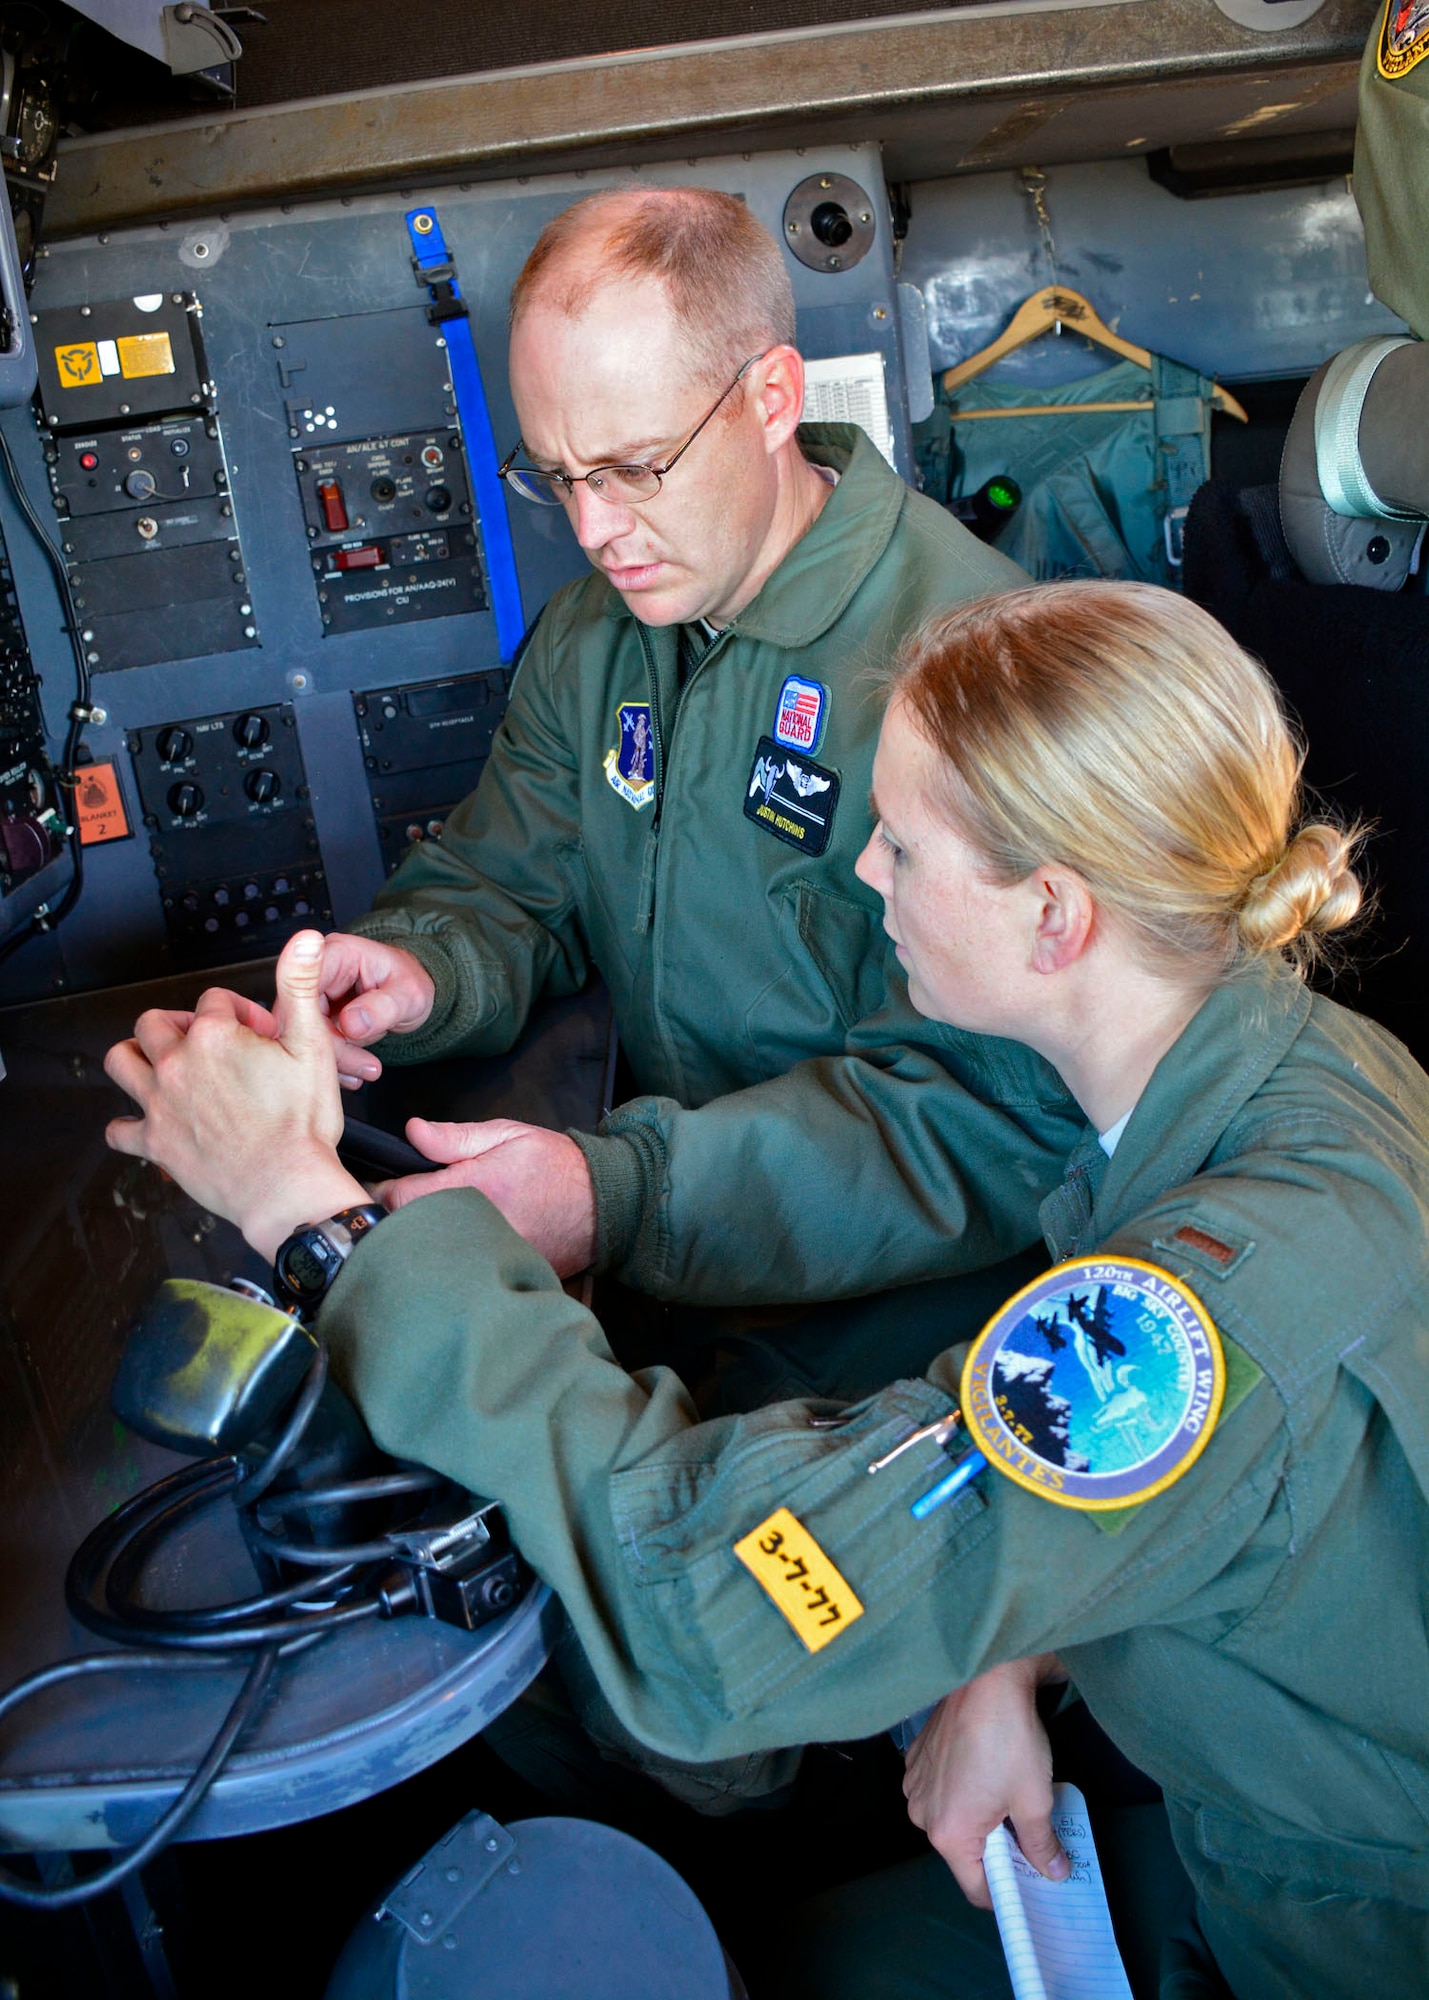 120th Airlift Wing Navigators Capt. Justin Hutchins and 2nd Lt. Tammy Wajer work on a navigation problem during training conducted in a C-130 Hercules transport aircraft parked on the 120th AW ramp in Great Falls, Mont. Sept. 15, 2016. (U.S. Air National Guard photo by Senior Master Sgt. Eric Peterson)